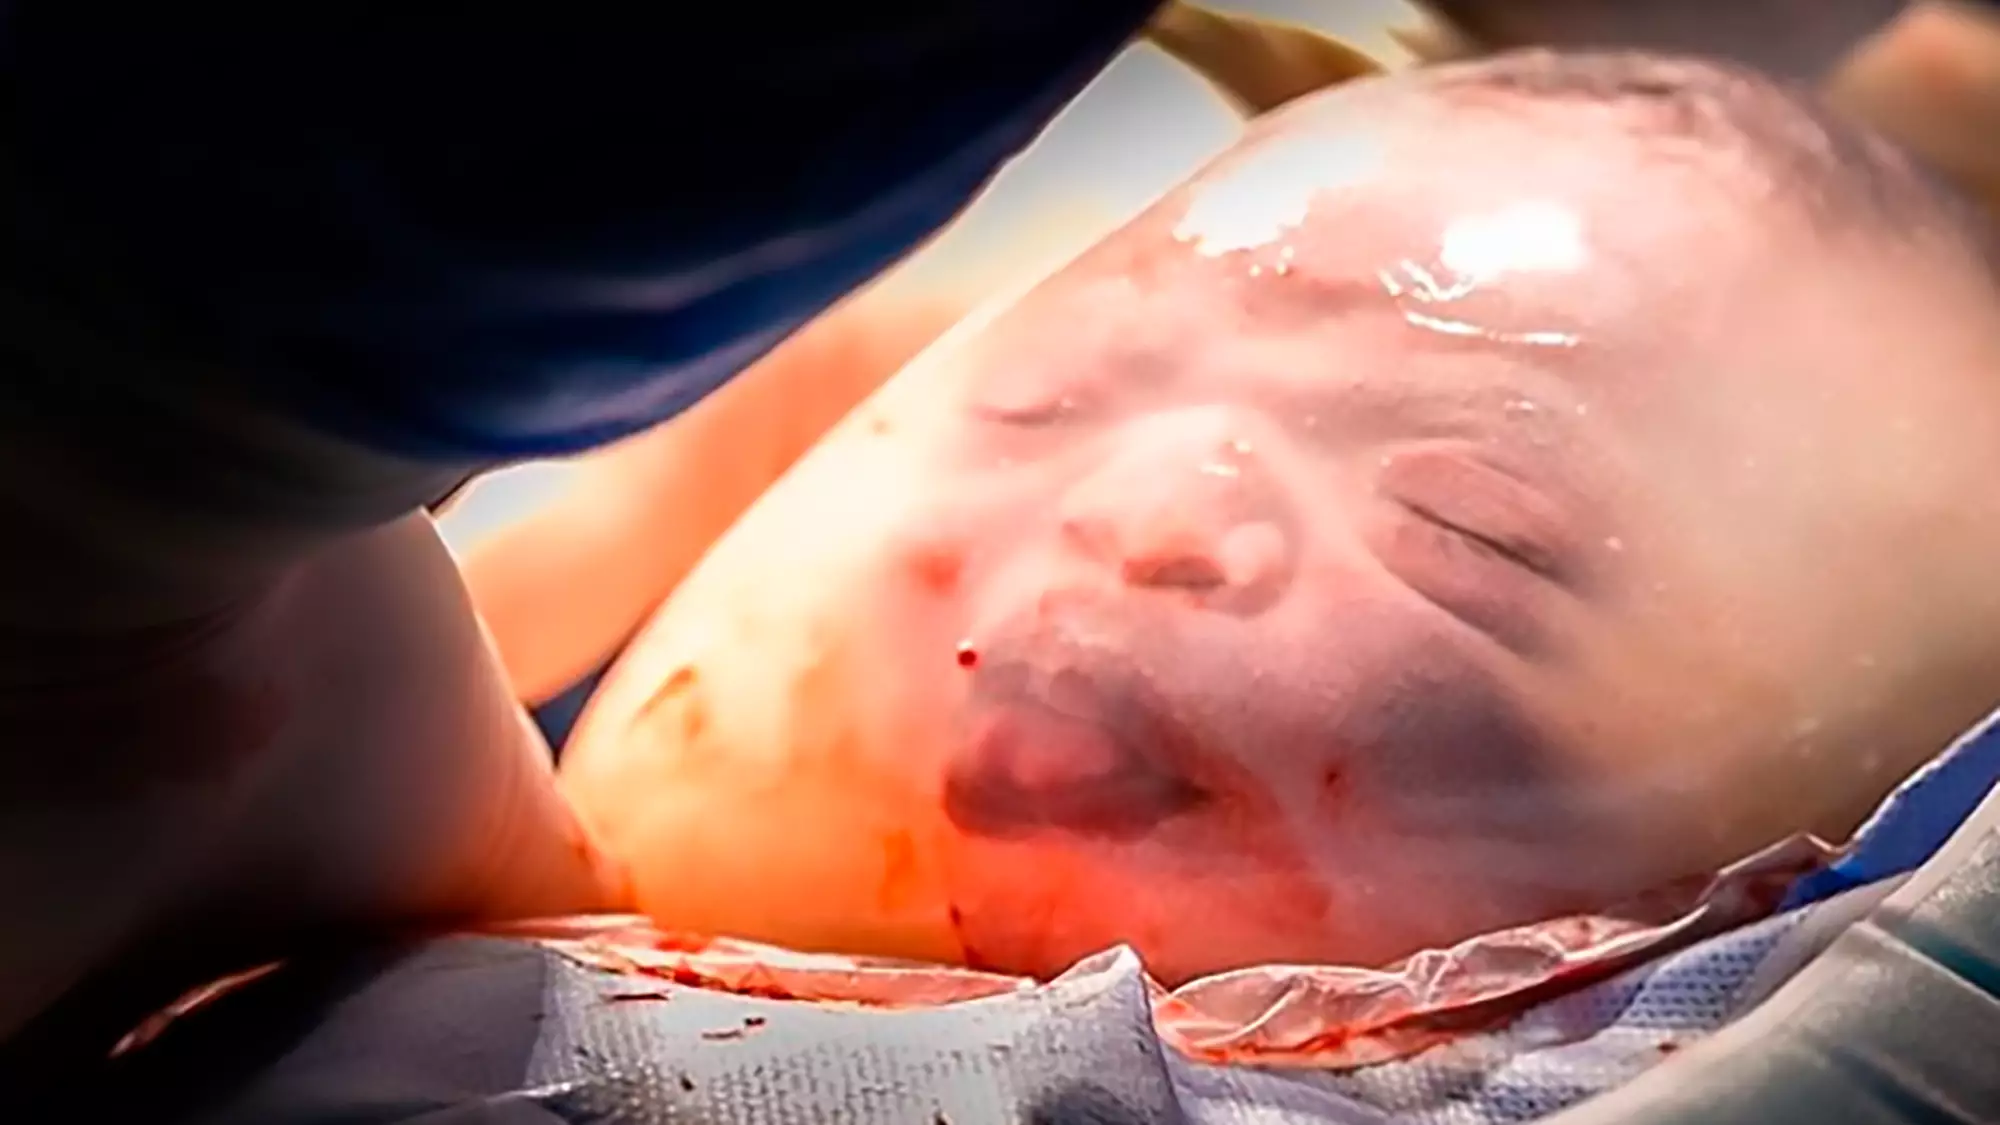 Incredible Images Show Baby Born Inside Amniotic Sac 